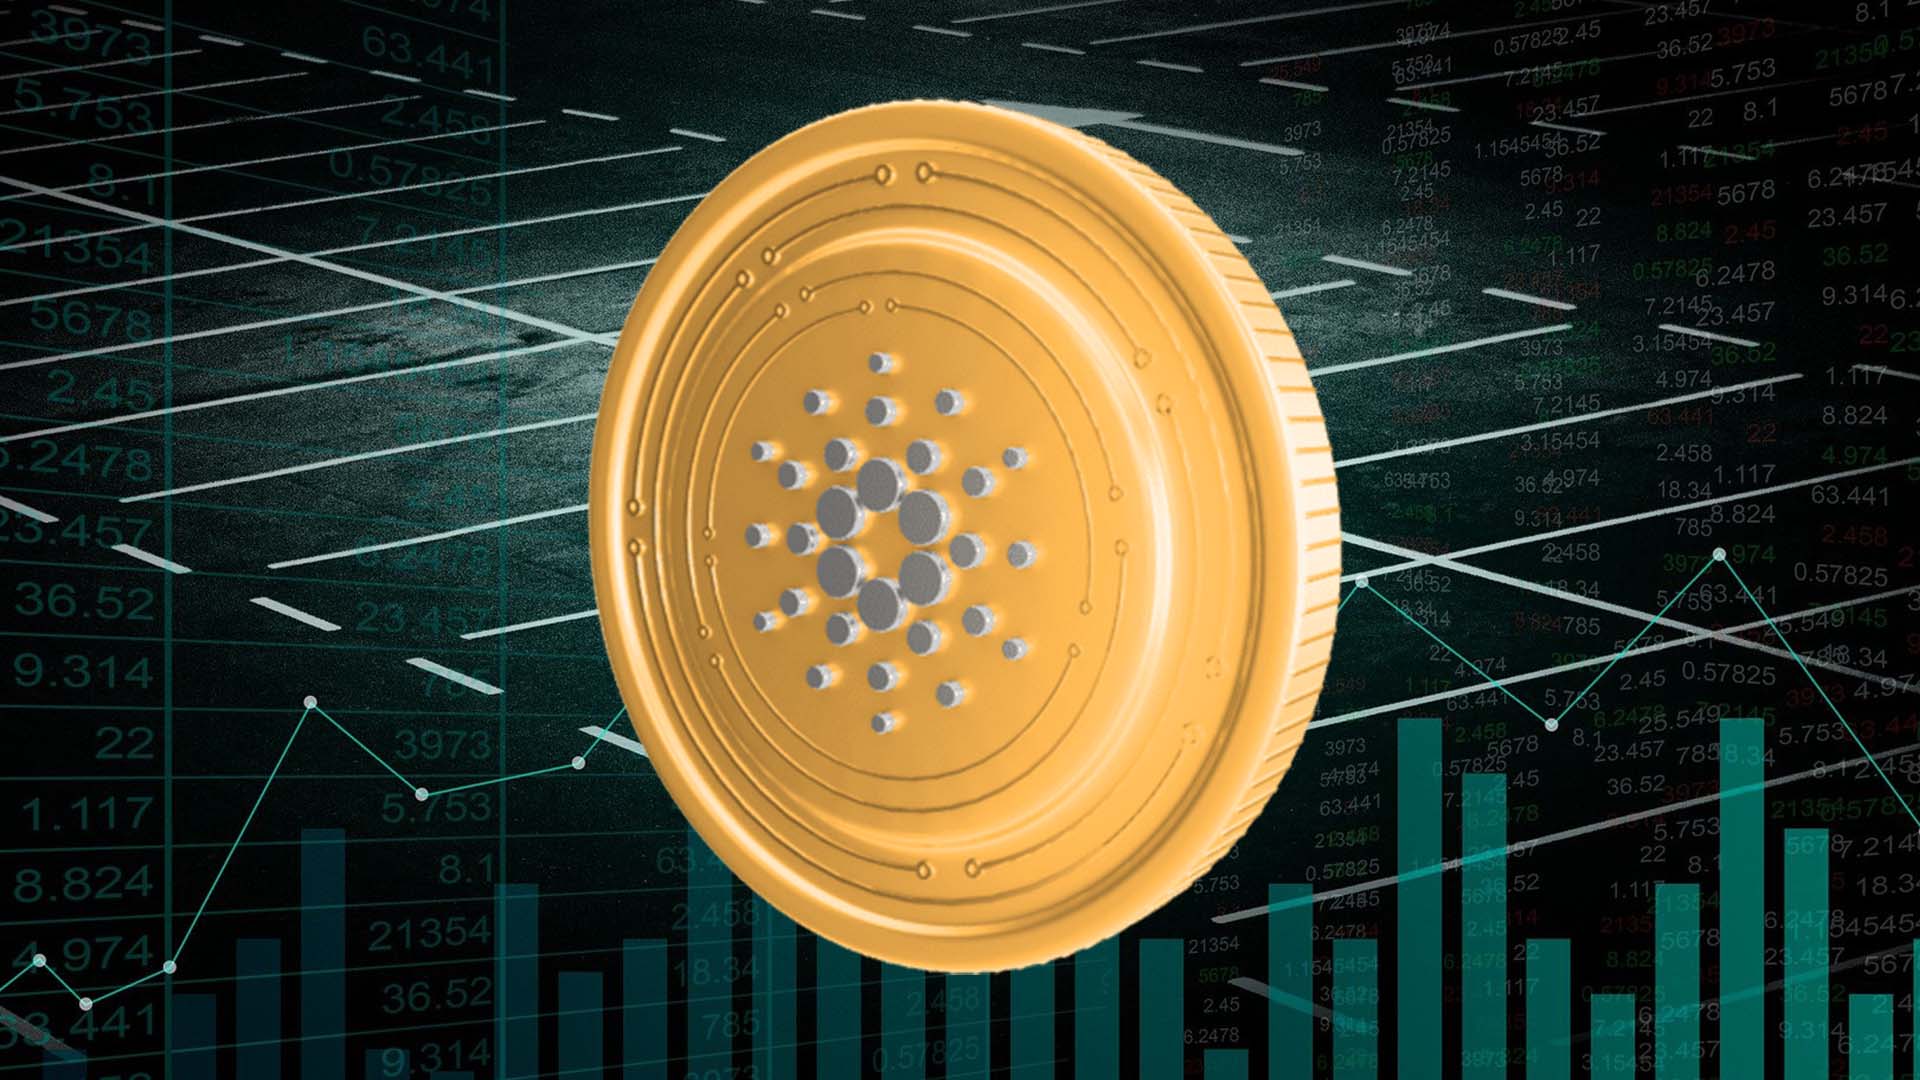 Cardano Price Prediction: Will ADA Crypto be able to Settle Back Inside the Range?